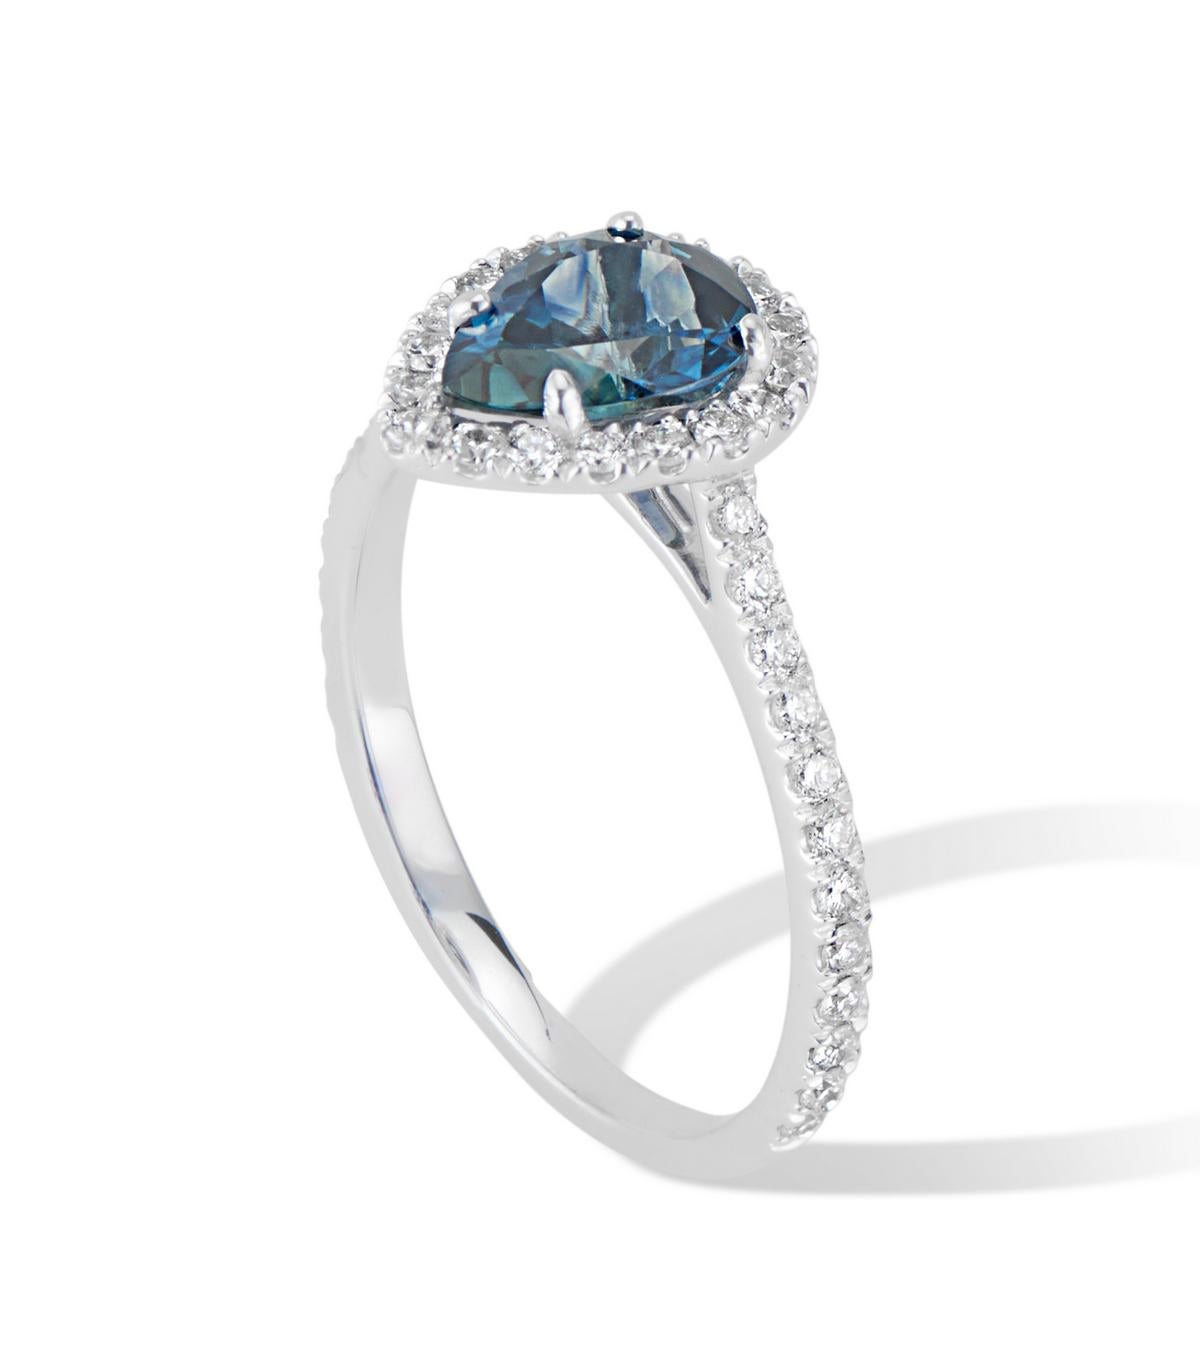 A stunning 1.31 carat Montana Pear Shaped Sapphire set in a sparkling halo of VS quality white diamonds to create an exquisite modern classic ring.
Set in a high quality 18k white gold setting, this beautiful ring is sure to be an heirloom for